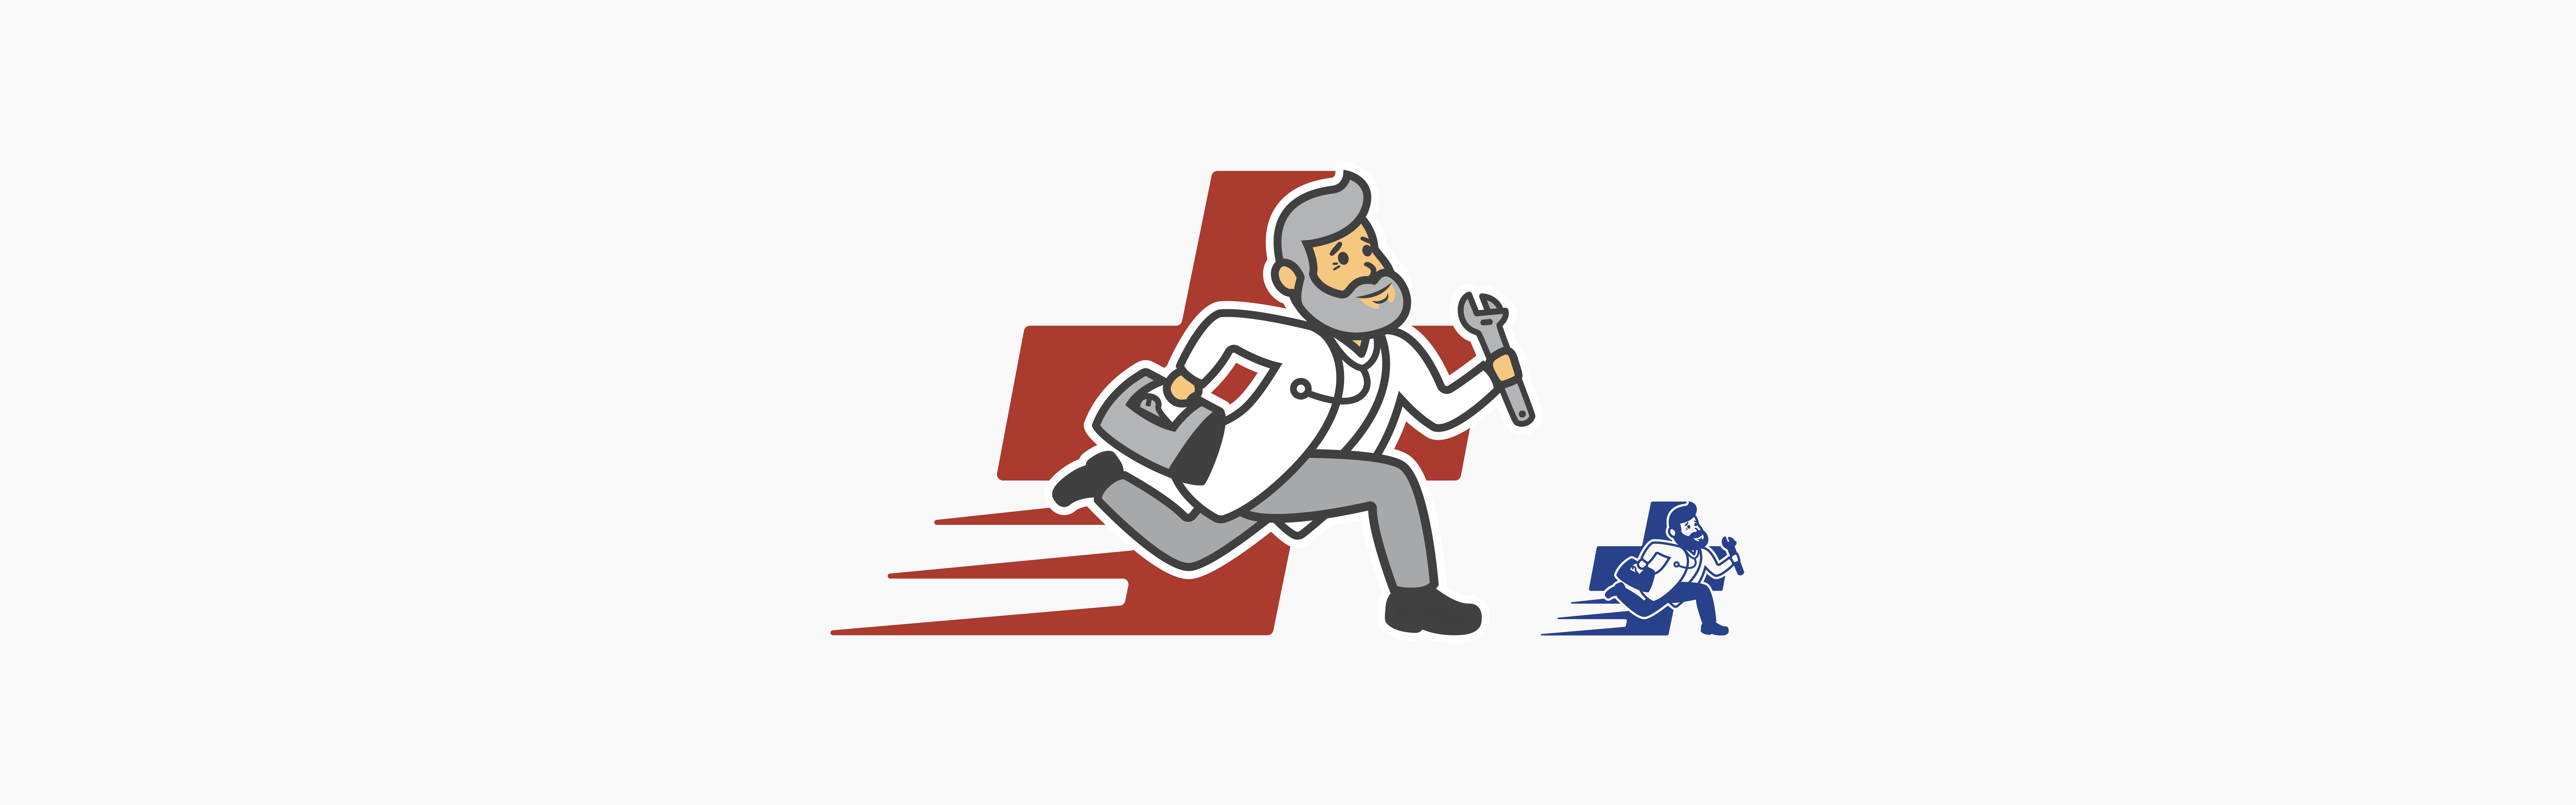 An illustrated character in a spacesuit carries a briefcase full of commercial appliance repair tools and appears to be running hastily past a small robotic figure, against a background featuring a stylized letter 'l'.